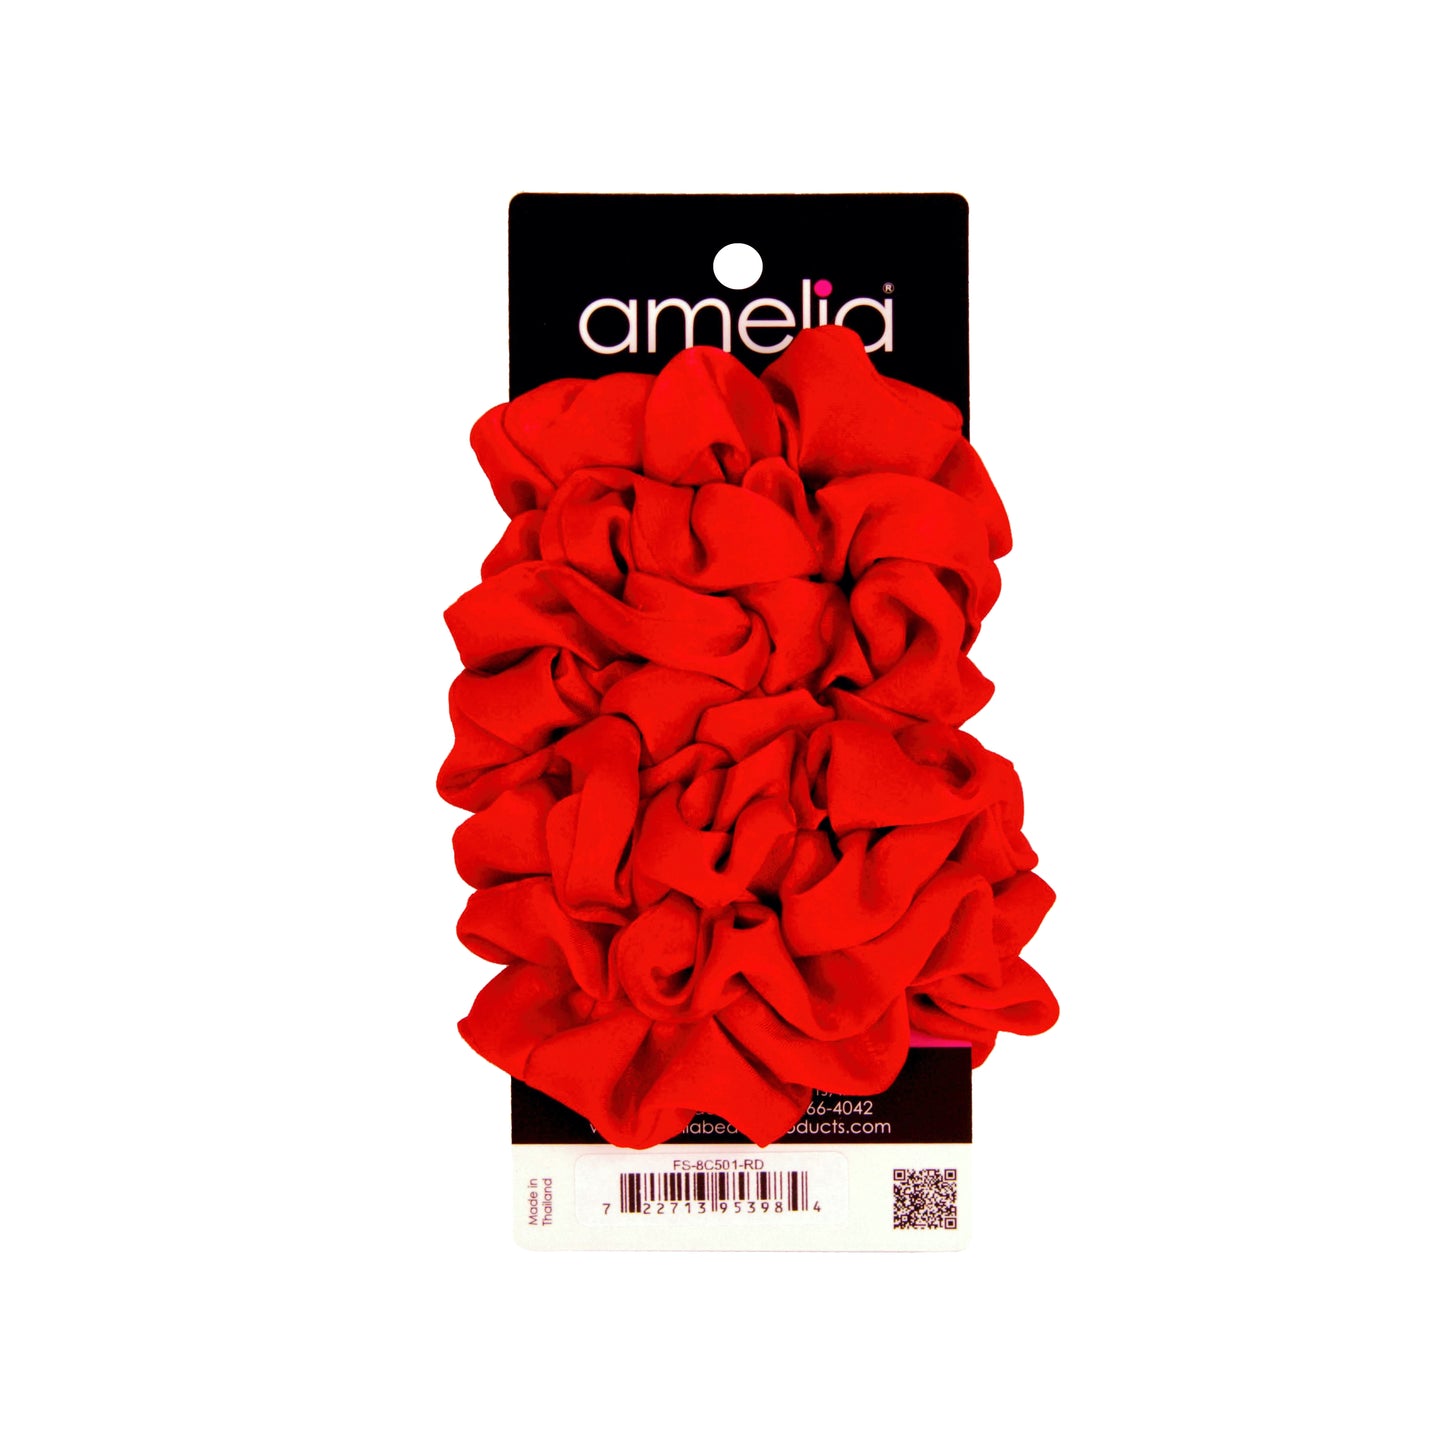 Amelia Beauty | 3in Red Crepe Scrunchies | Soft, Gentle and Strong Hold | No Snag, No Dents or Creases | 8 Pack